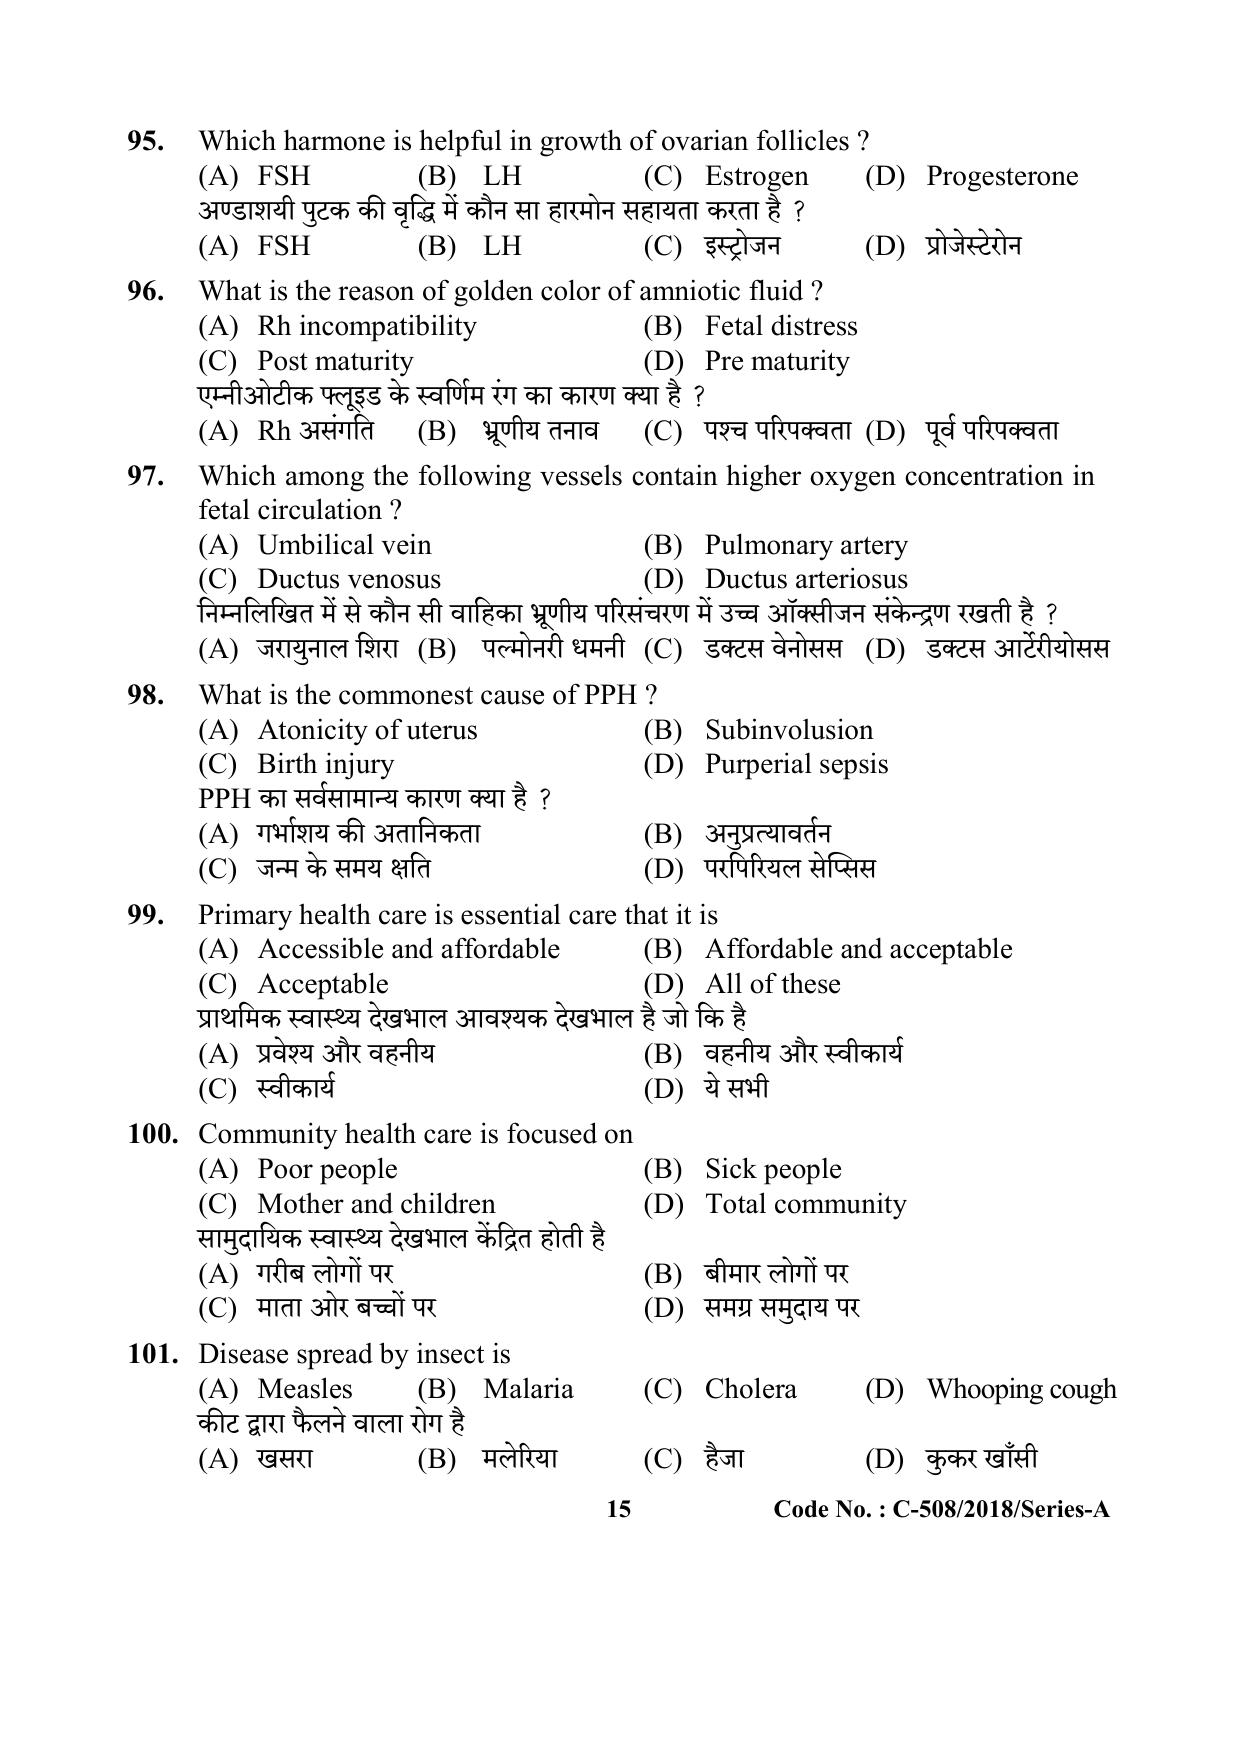 UP Health Worker Thematic Knowledge Previous Year Question Paper - Page 15